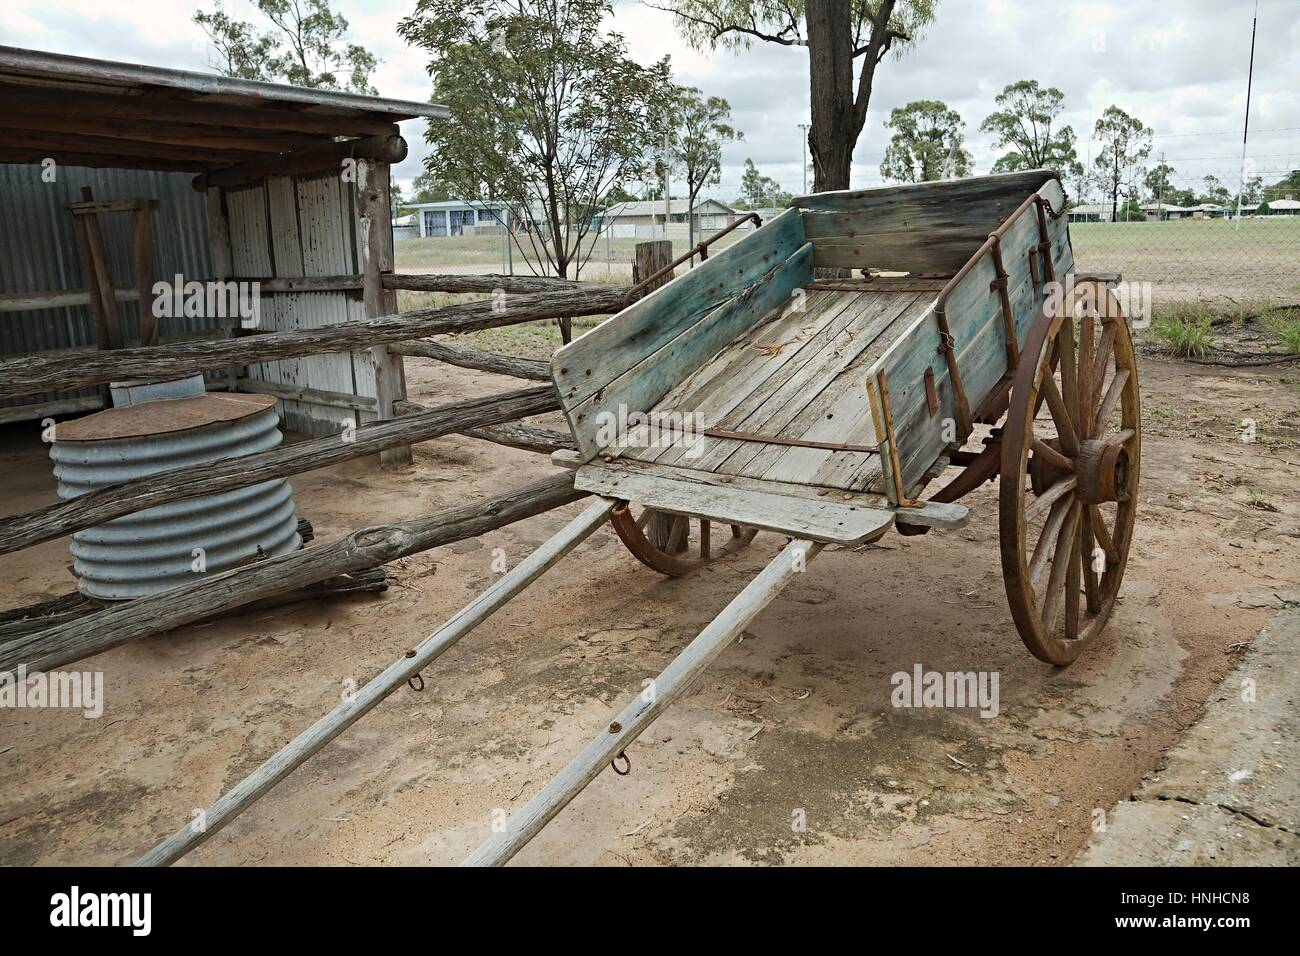 Old wooden cart Stock Photo